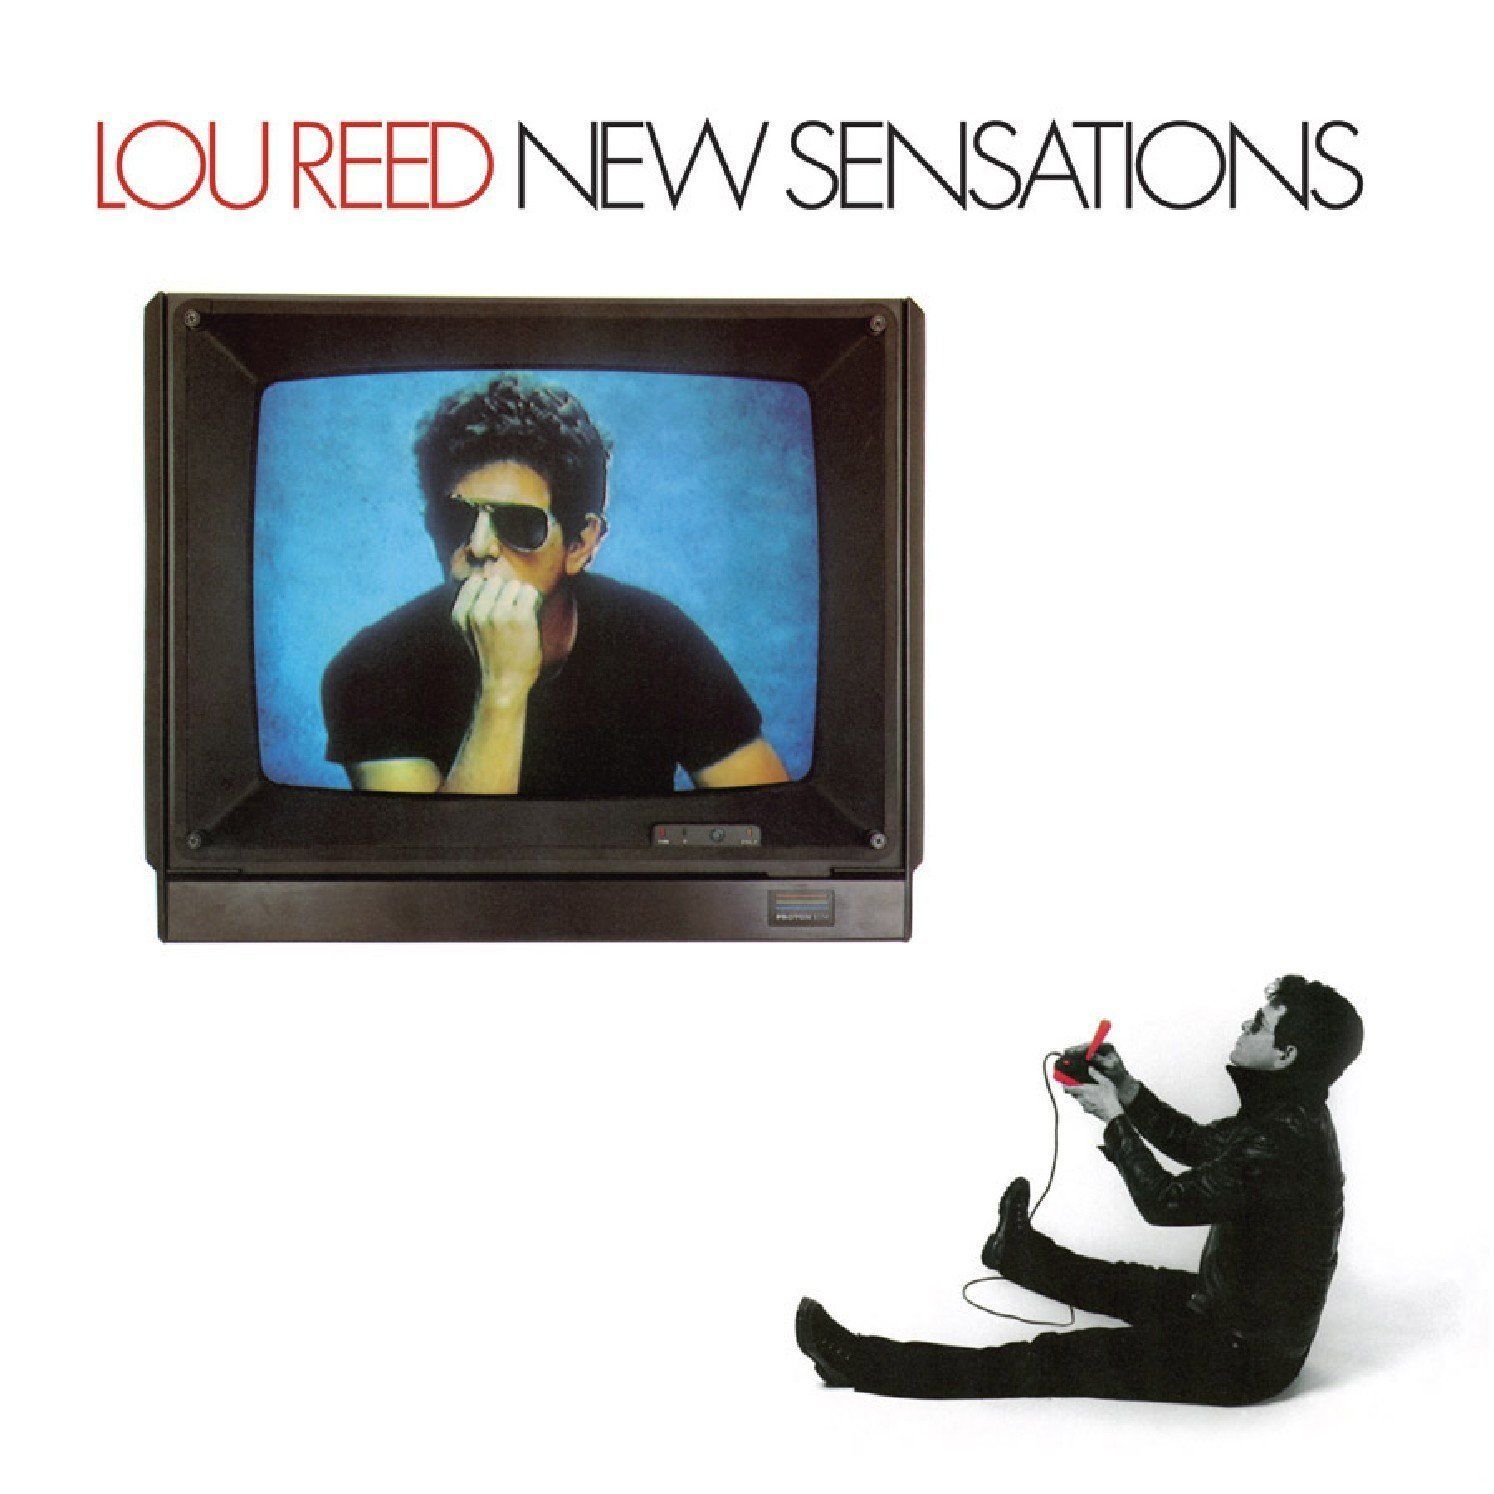 New Sensations (Lou Reed – Artist Of The Year Part 16)